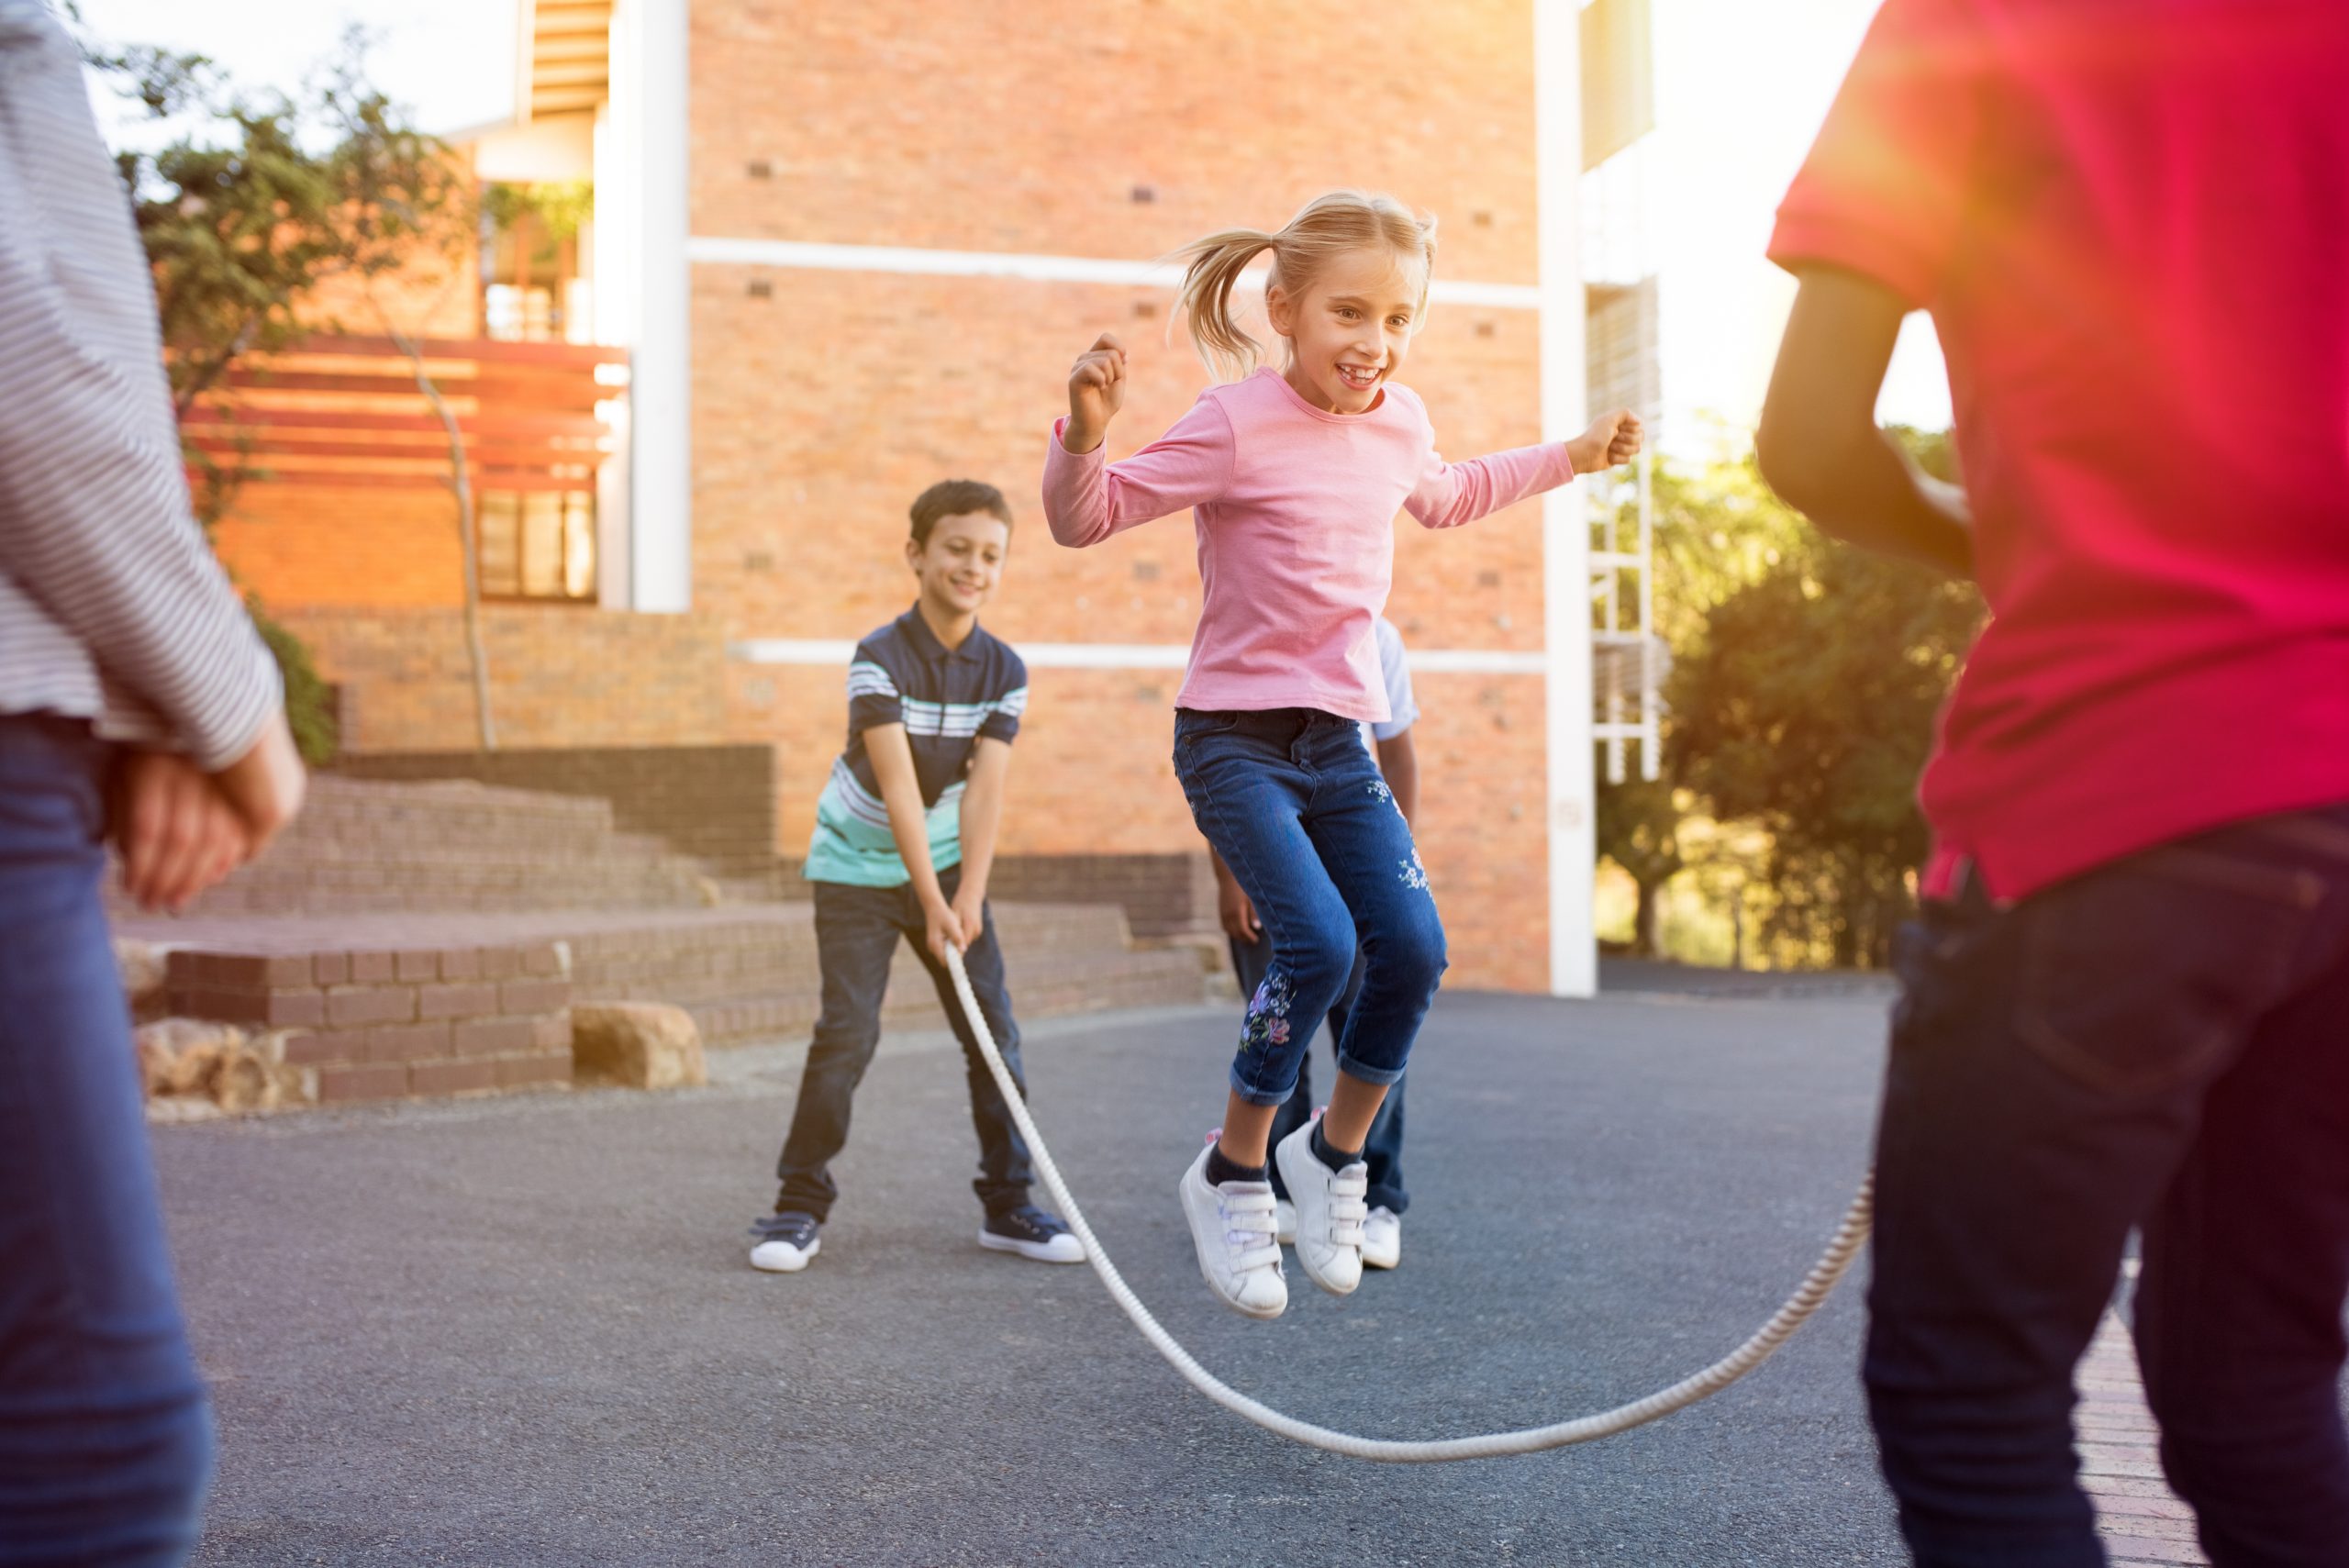 Young girl playing jump rope